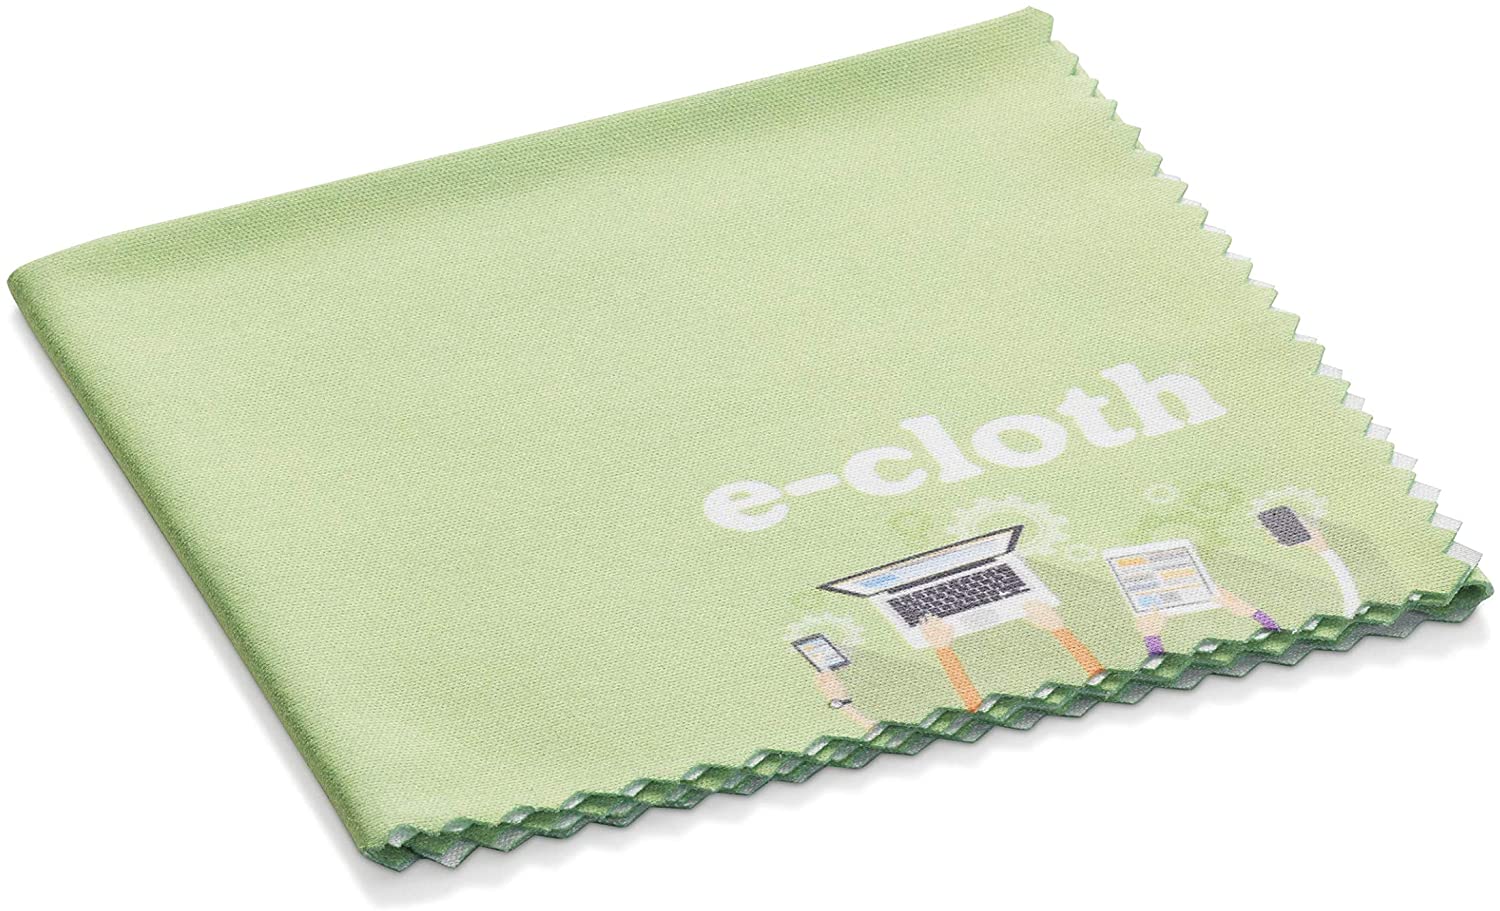 e-Cloth Personal Electronics Cleaning Cloth